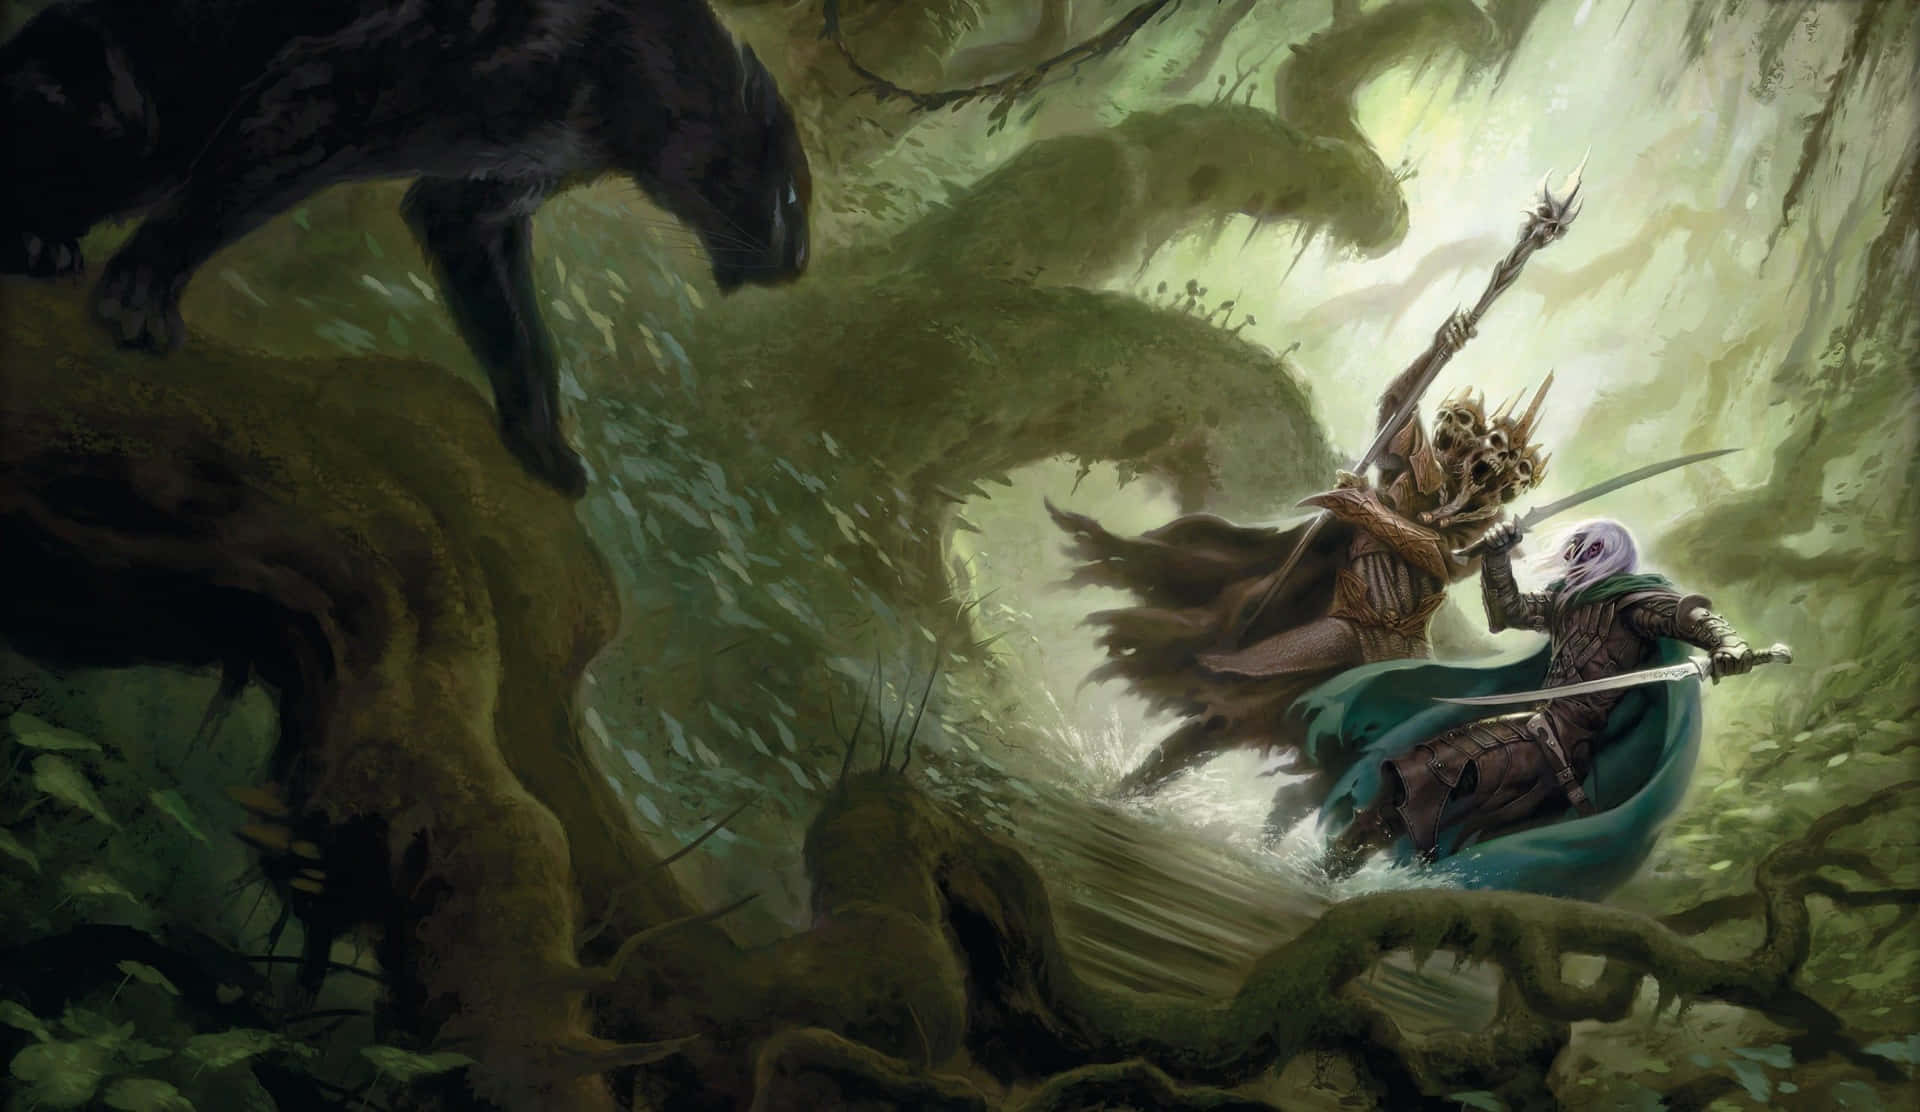 Adventurers battling a colossal dragon in an epic Dungeons and Dragons quest